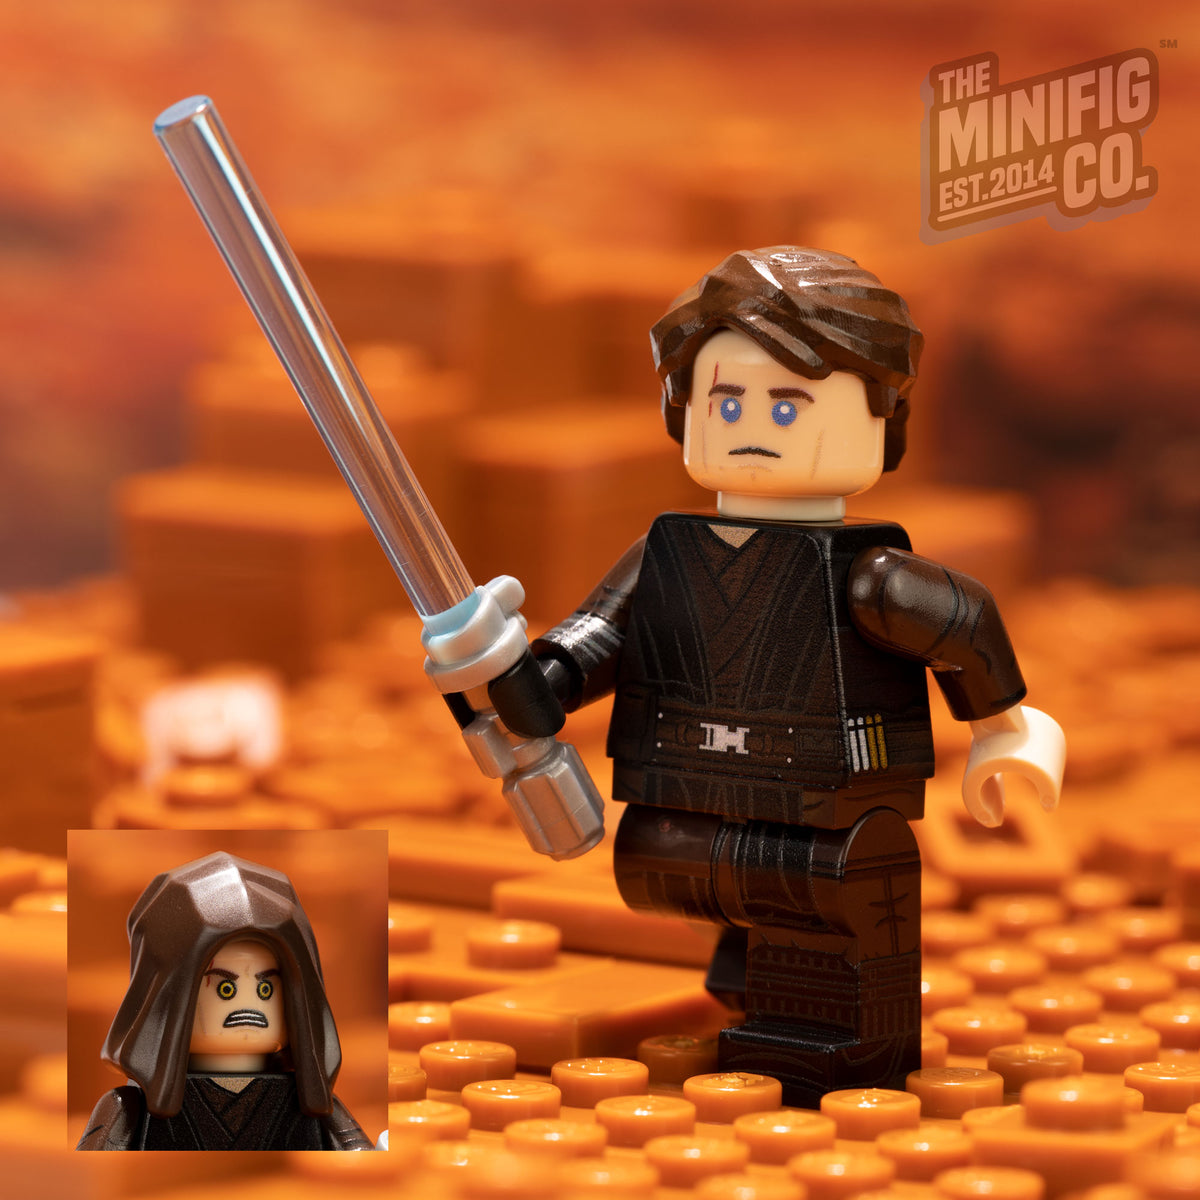 The Chosen One - ROTS - The Minifig Co.